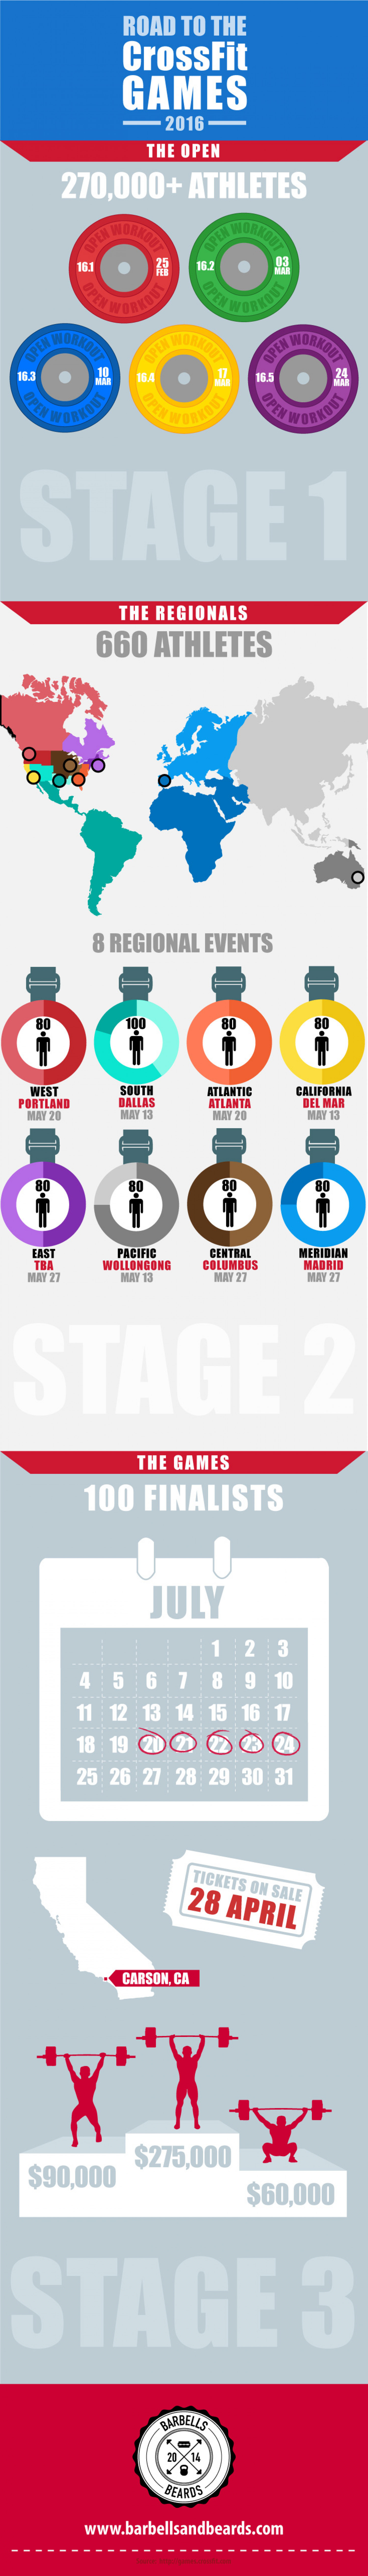 Guide to the Crossfit Games 2016 Infographic